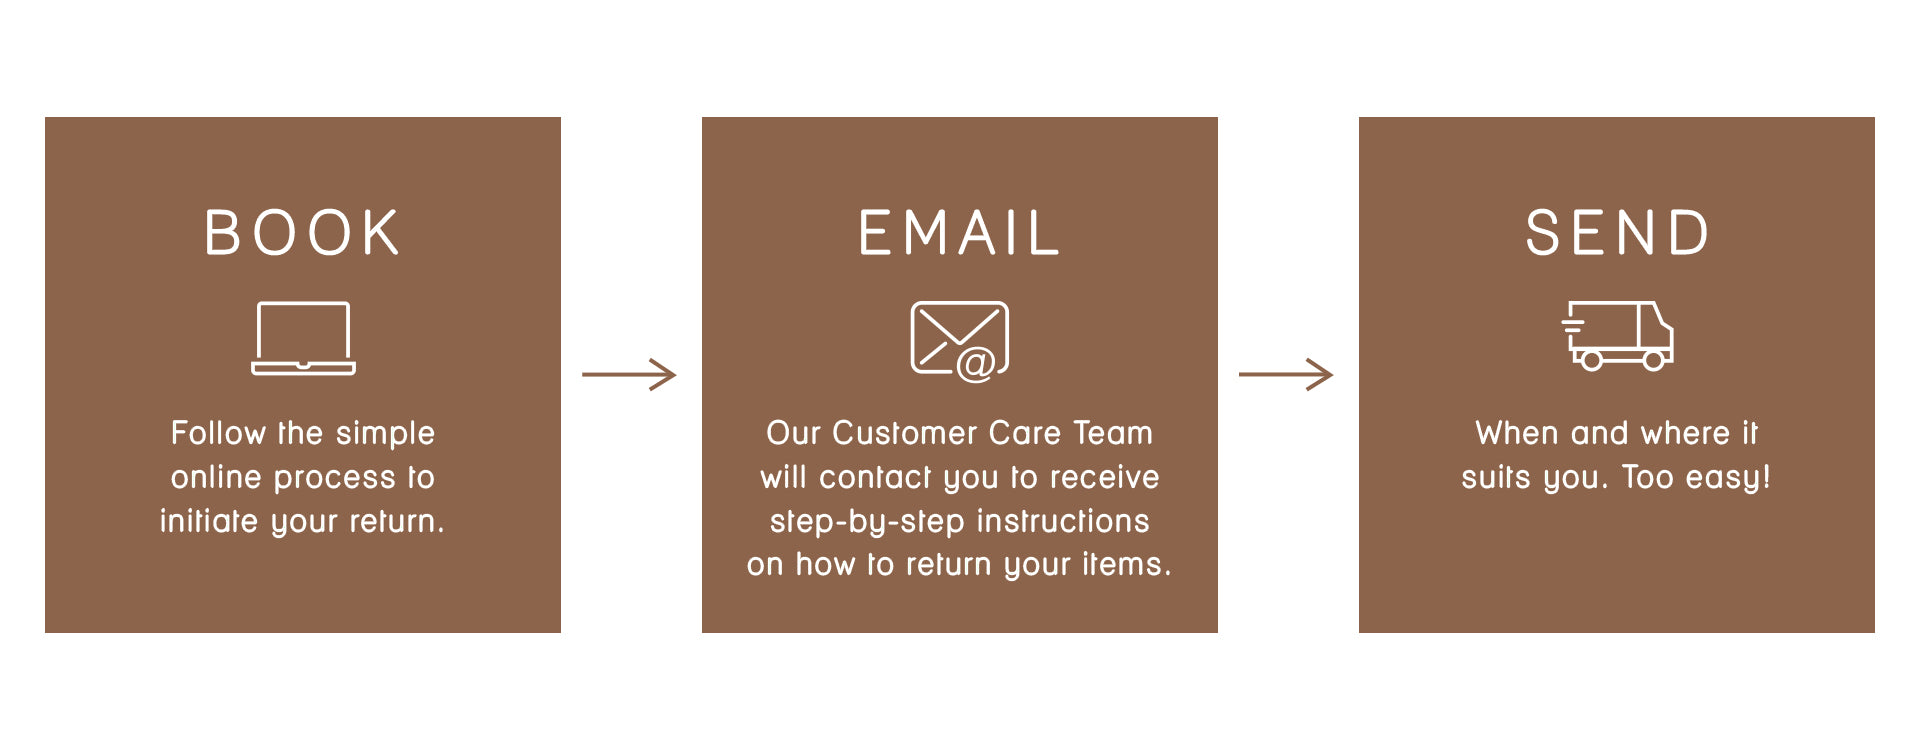 BOOK.Follow the simple online process to initiate your return.EMAIL. Our Customer Care Team will contact you with your Return Authorization Number and instructions on how to return.SEND. When and where it suits you. Too easy